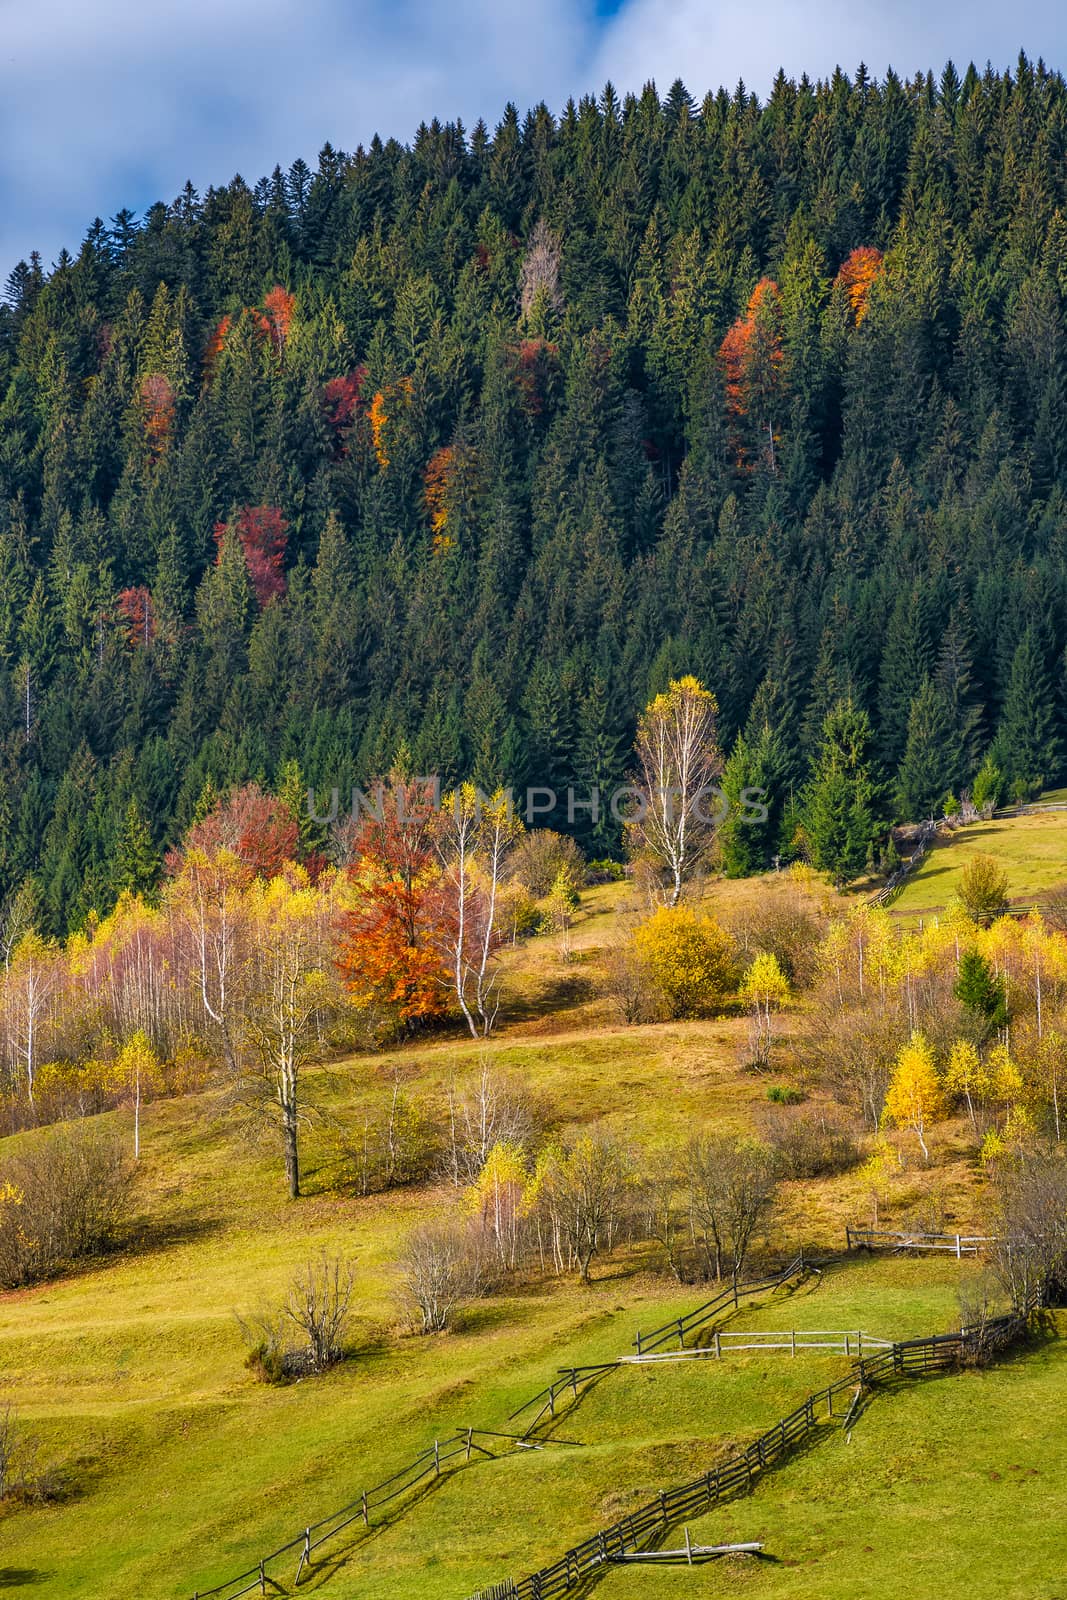 agricultural fields on hillside near forest by Pellinni